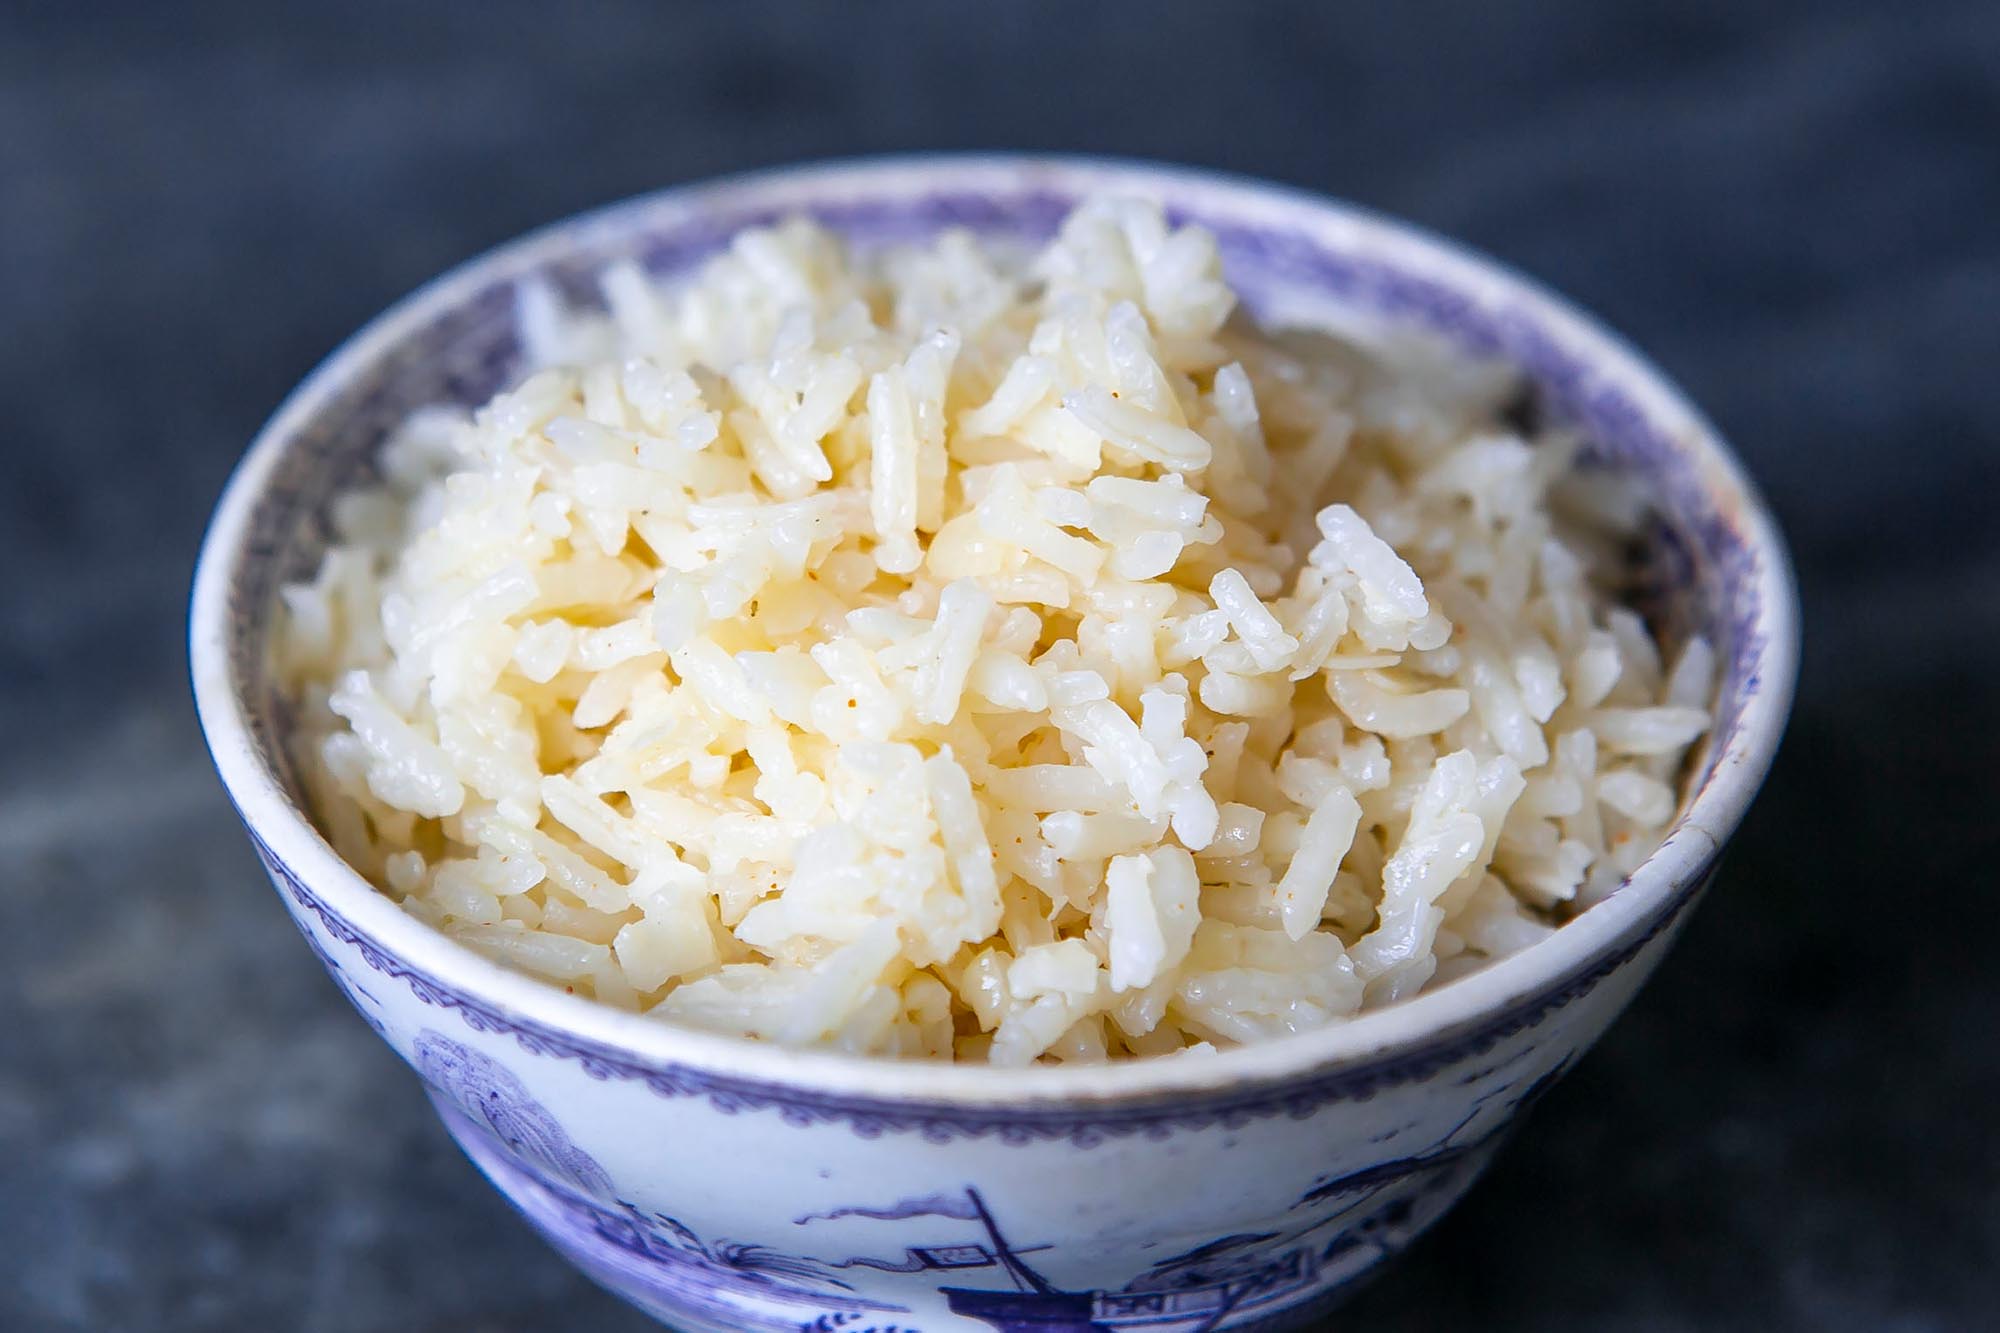 Coconut rice made with coconut, coconut water, and coconut oil in a round bowl